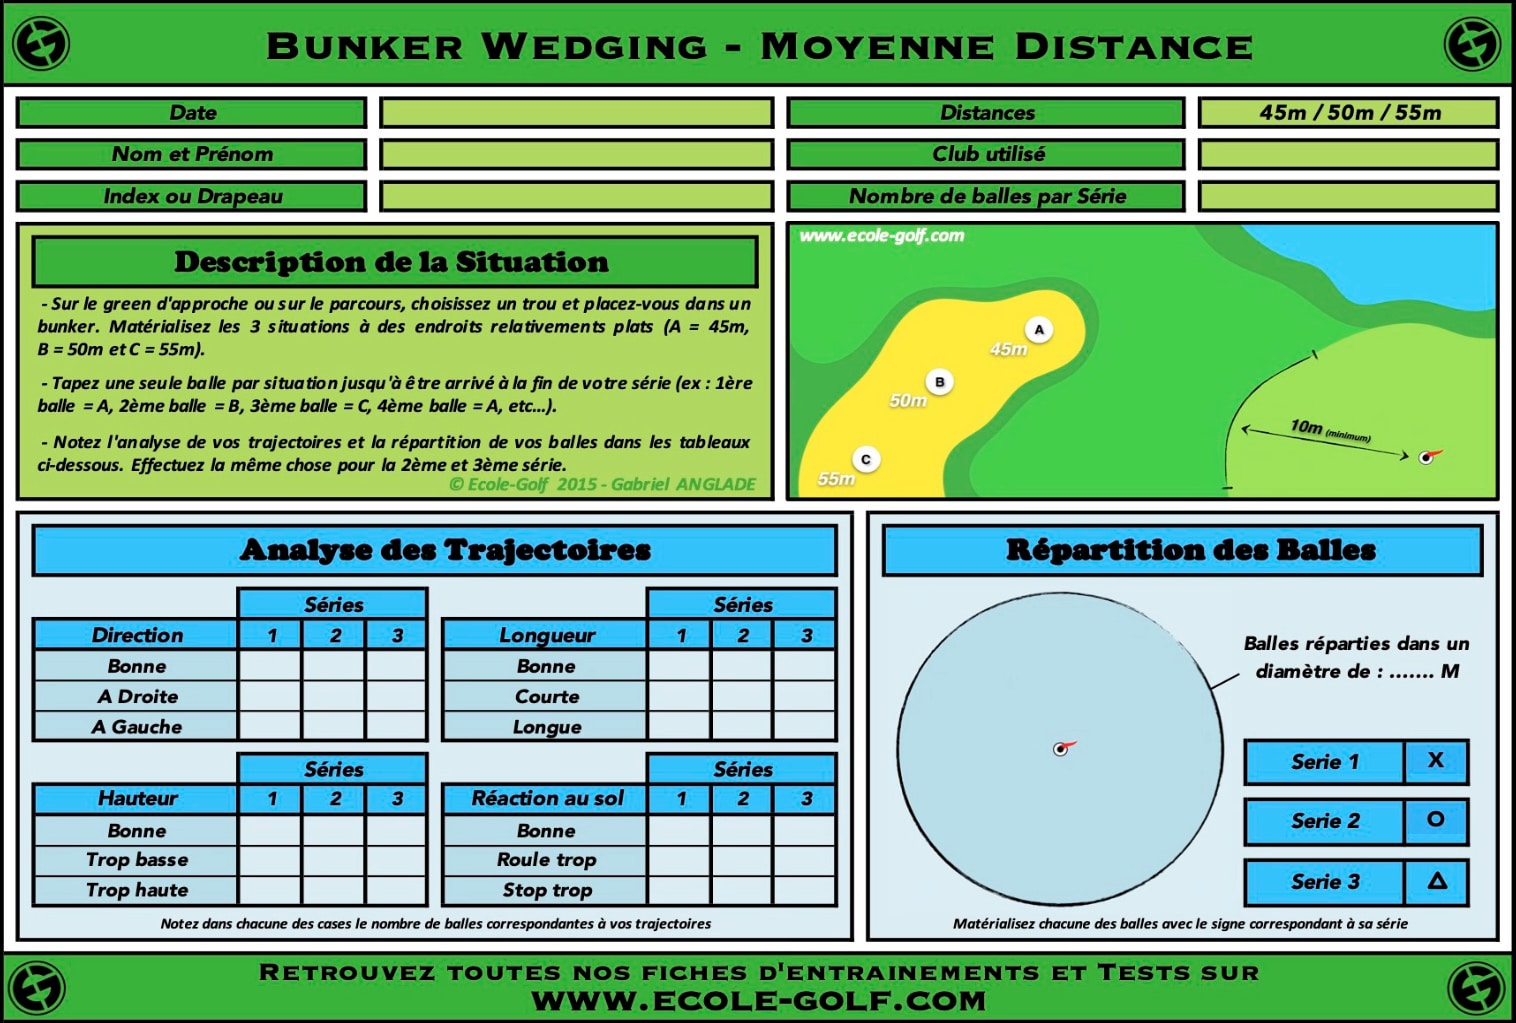 Bunker Wedging - Moyenne Distance